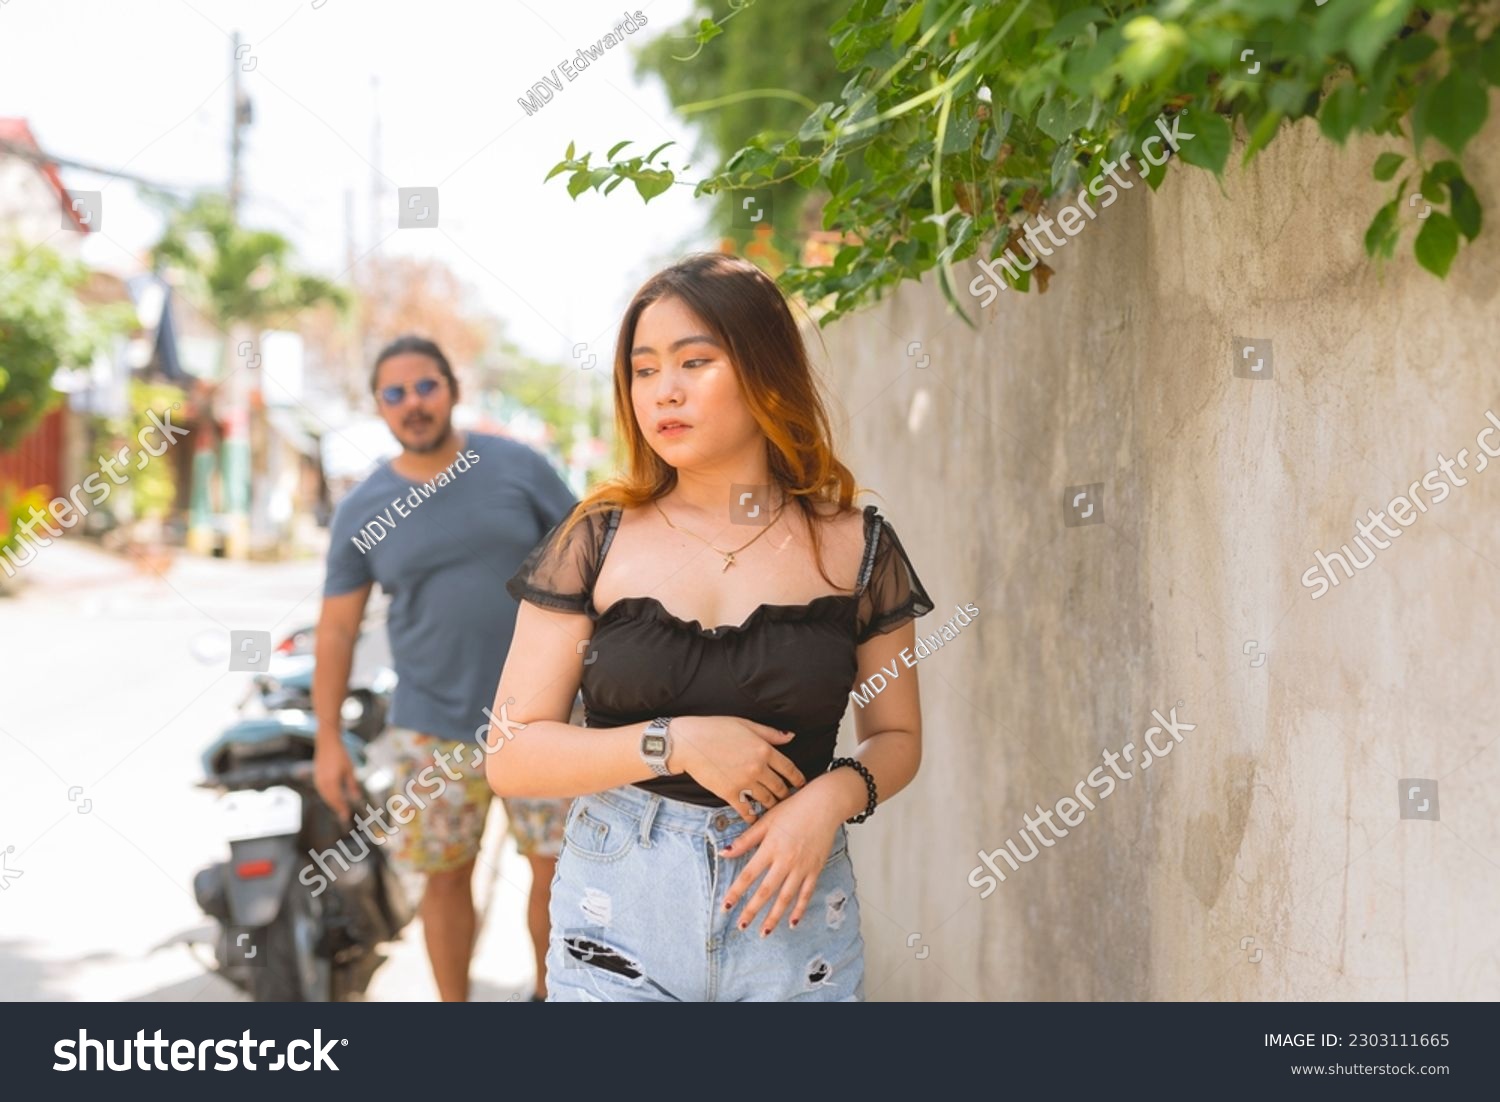 An anxious asian woman notices a creepy man following her for a while. Outdoor scene. #2303111665